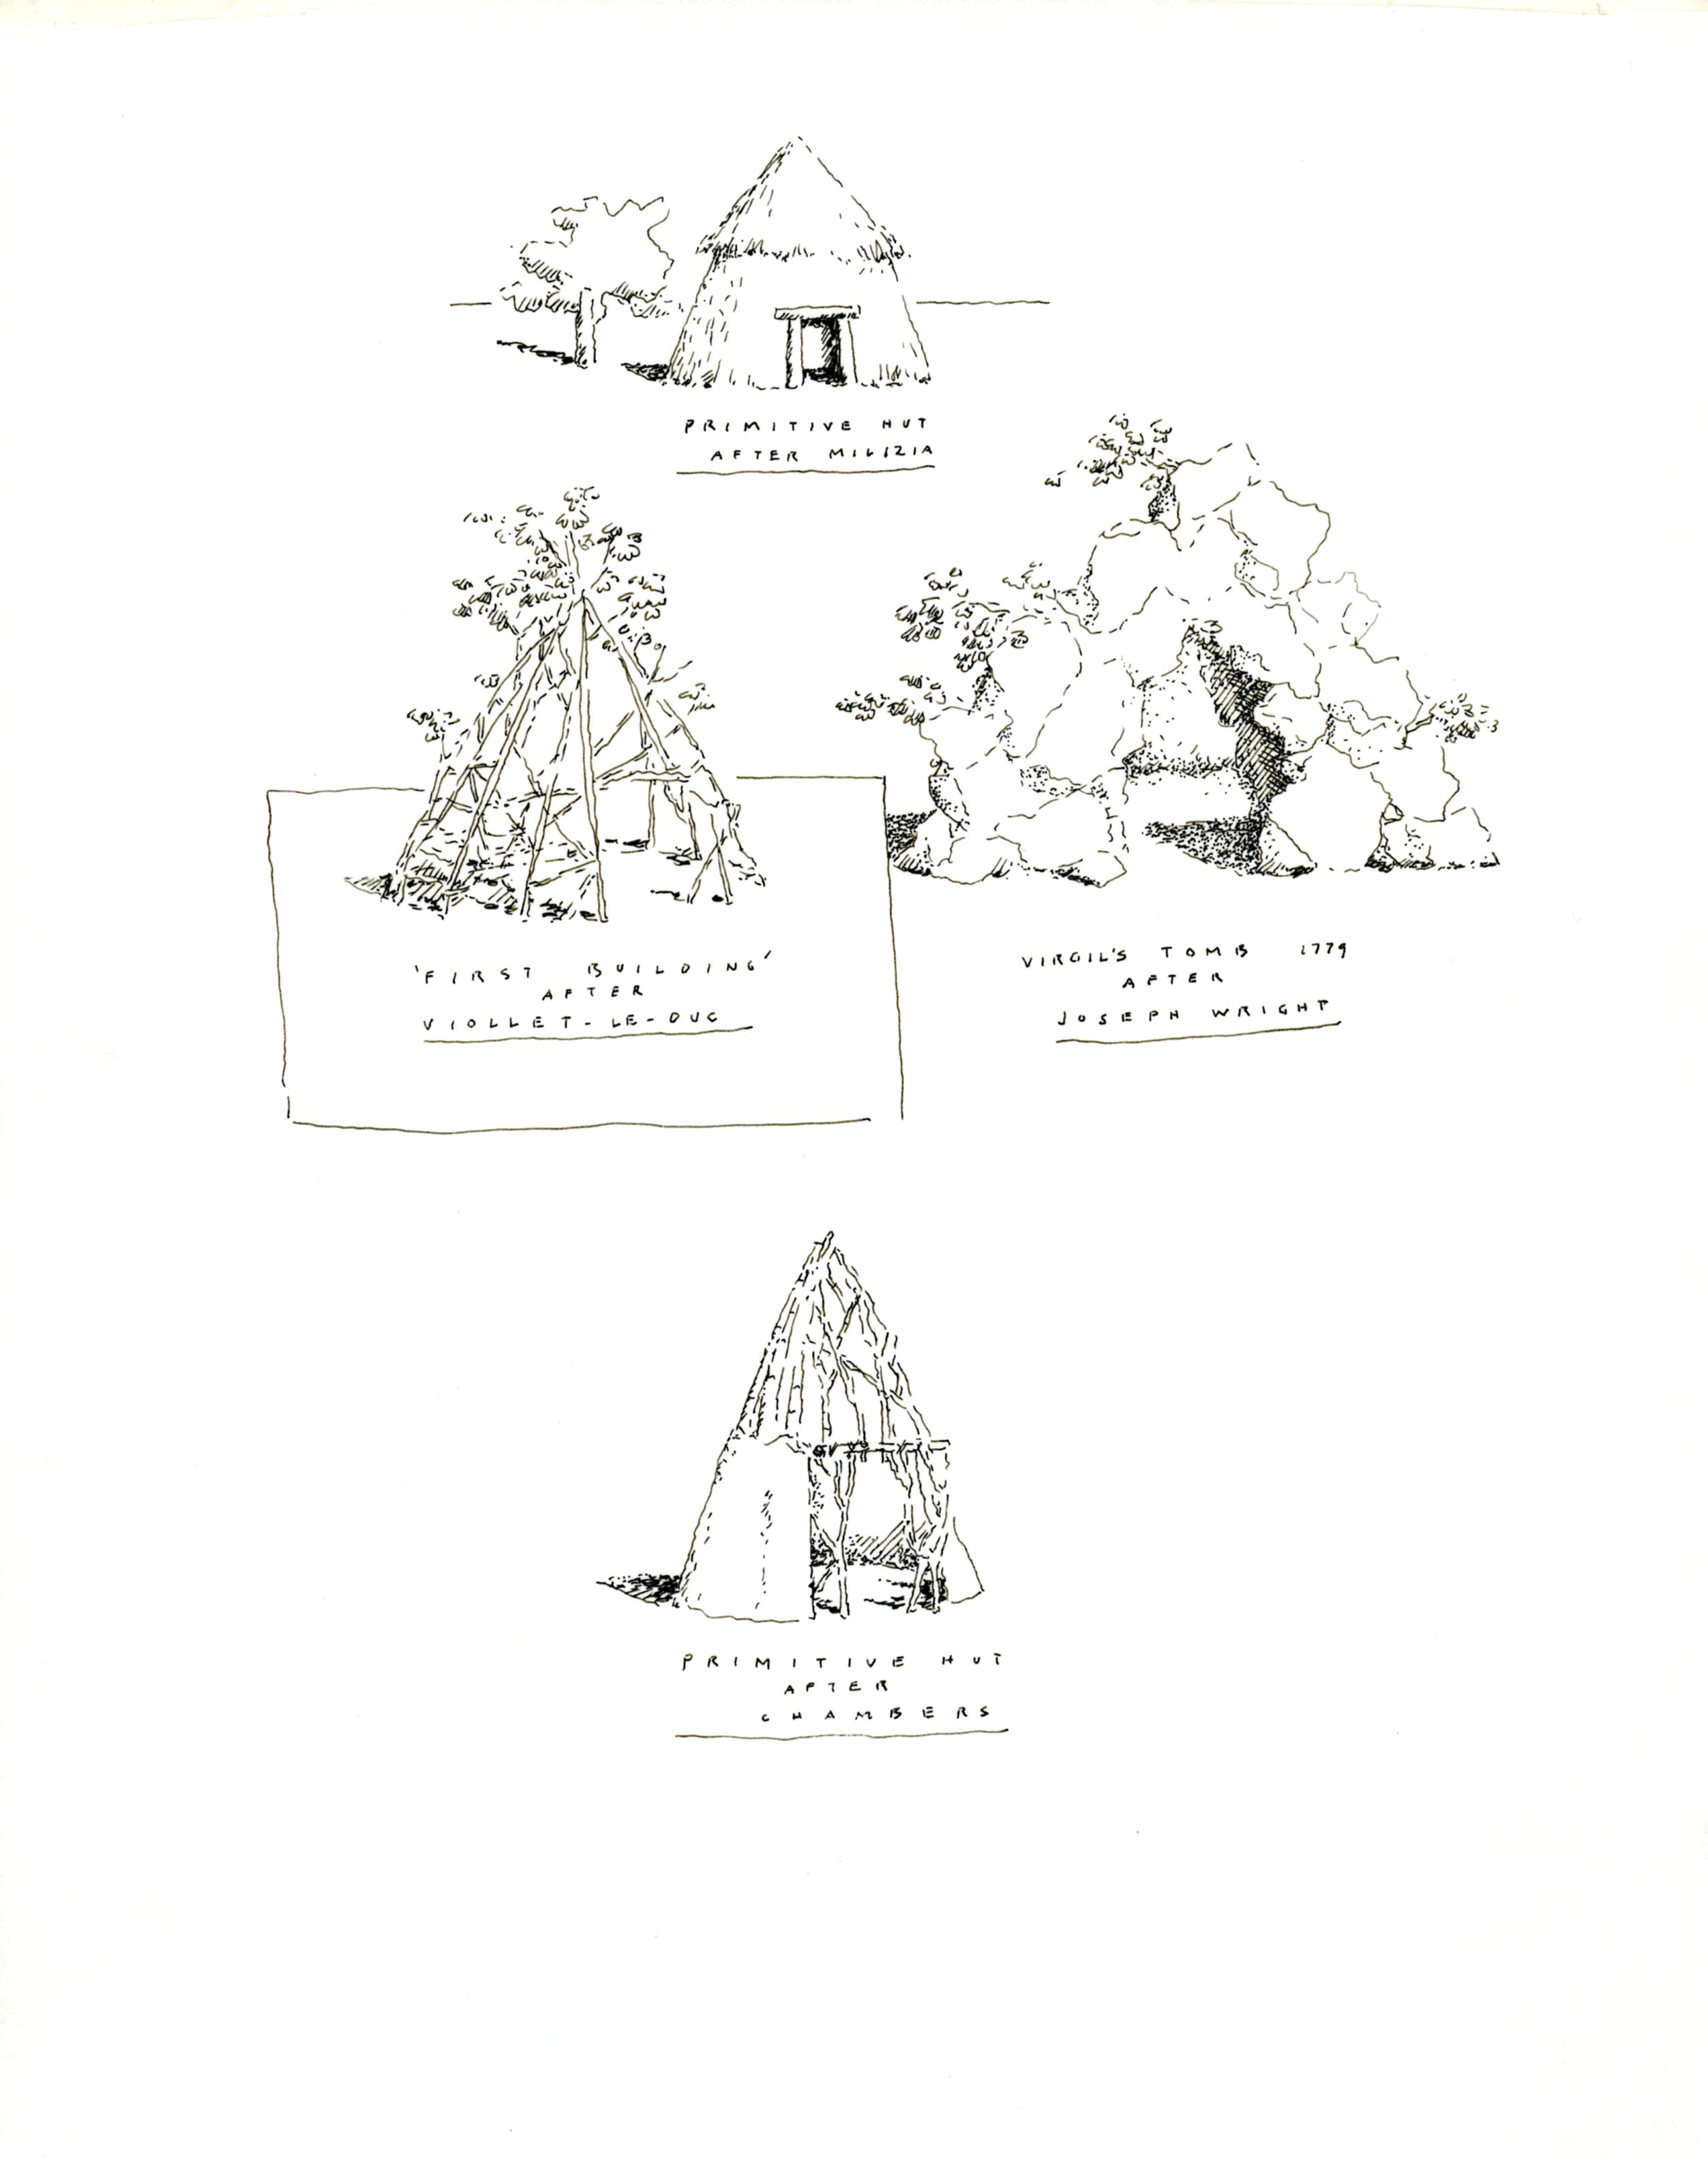 Ink sketches composed for Castelli Folly: Michael Graves